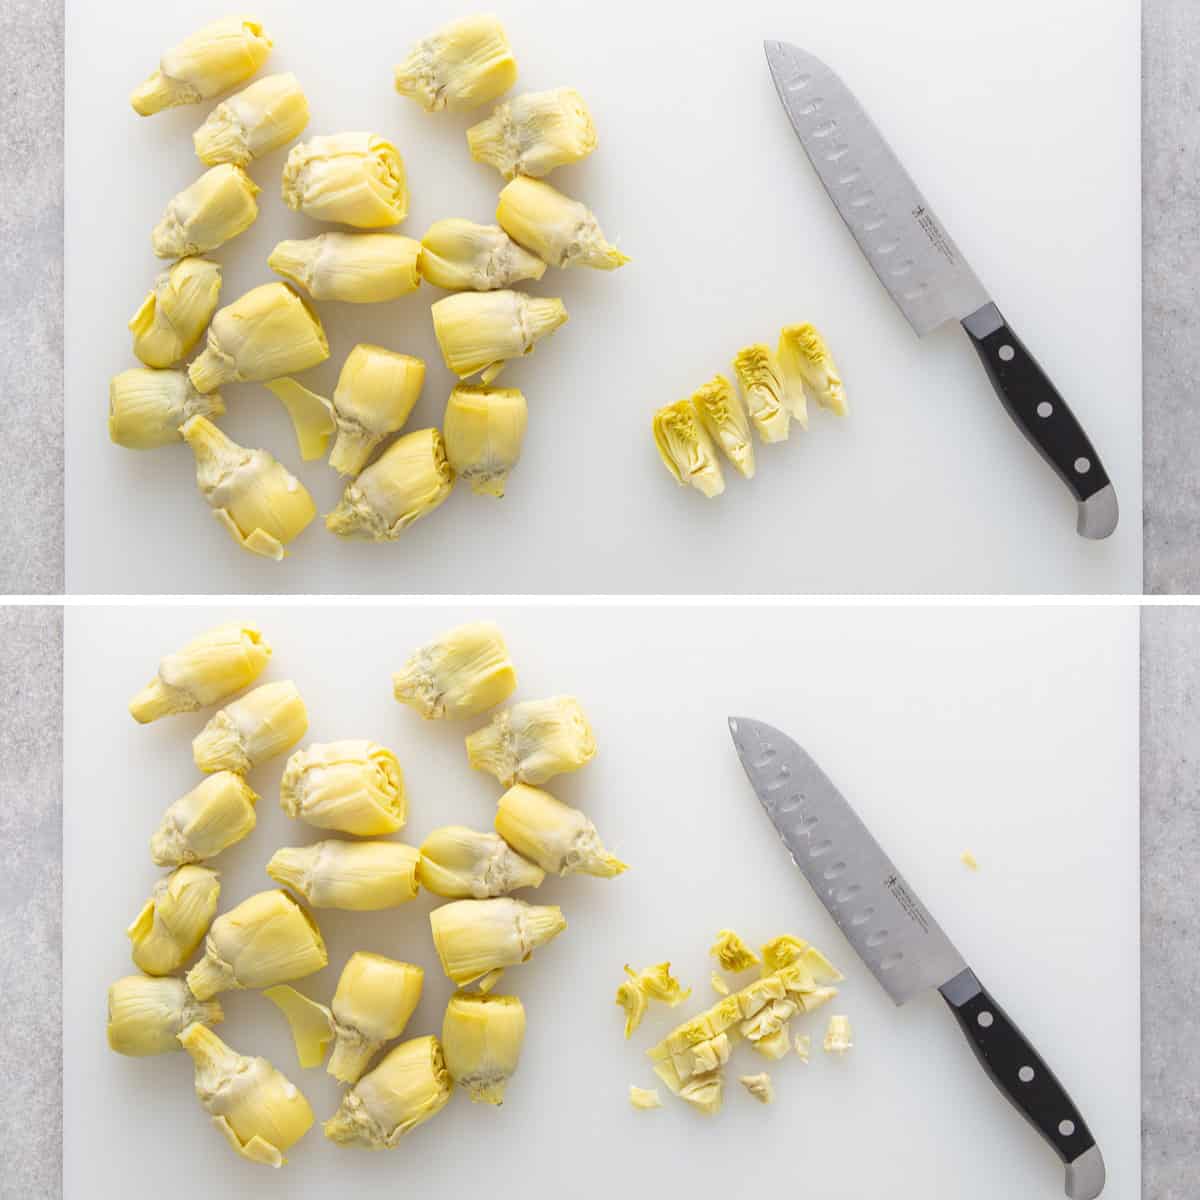 Two images of drained canned artichoke hearts on a cutting board with a knife.